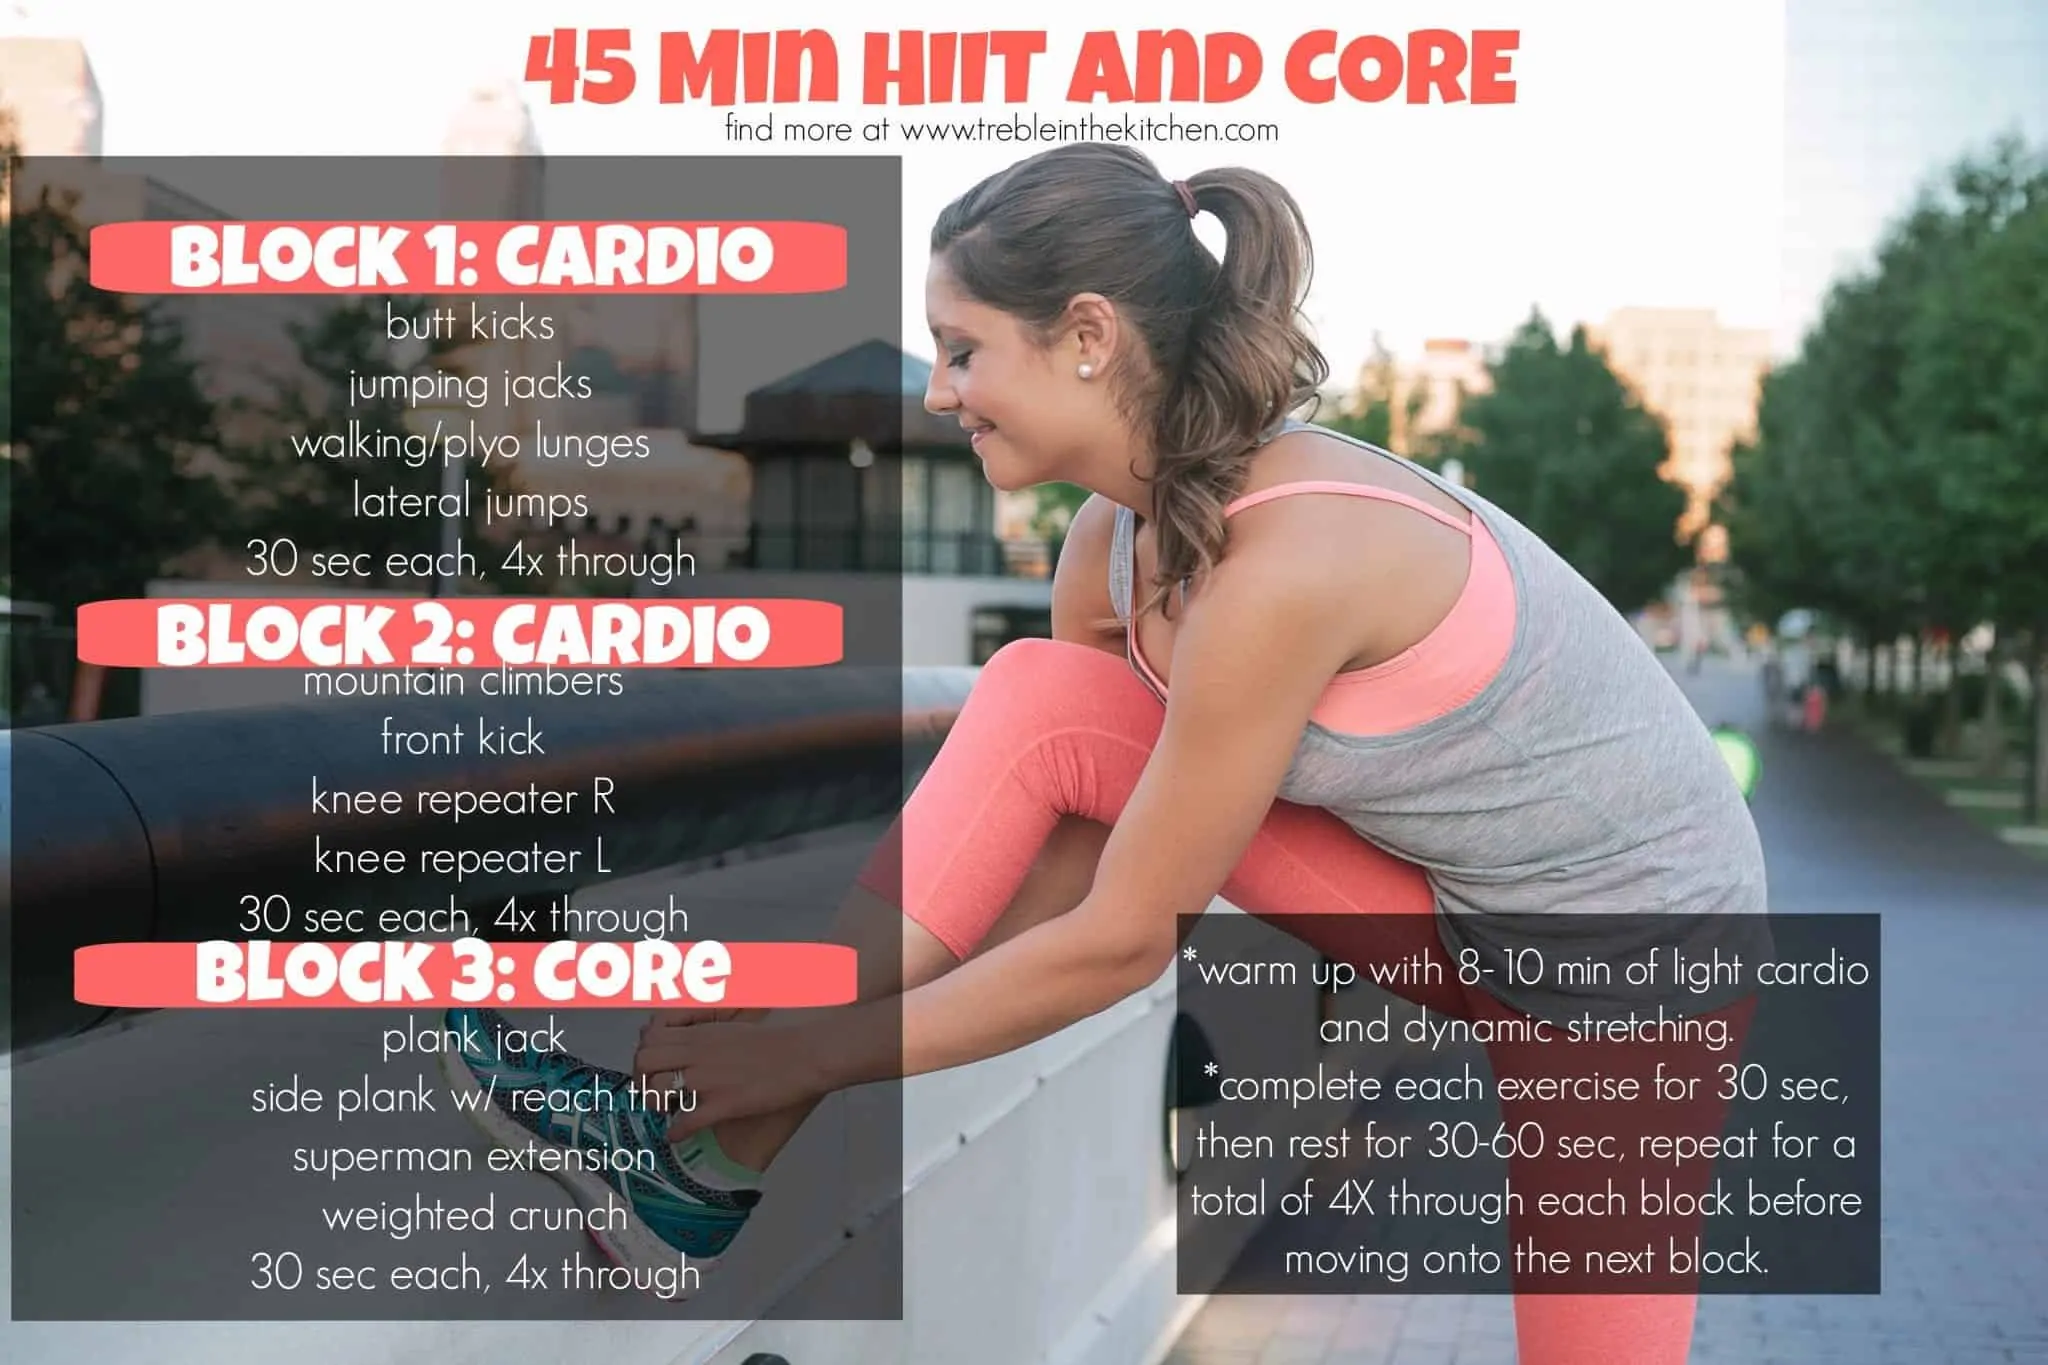 45 Min HIIT and Core